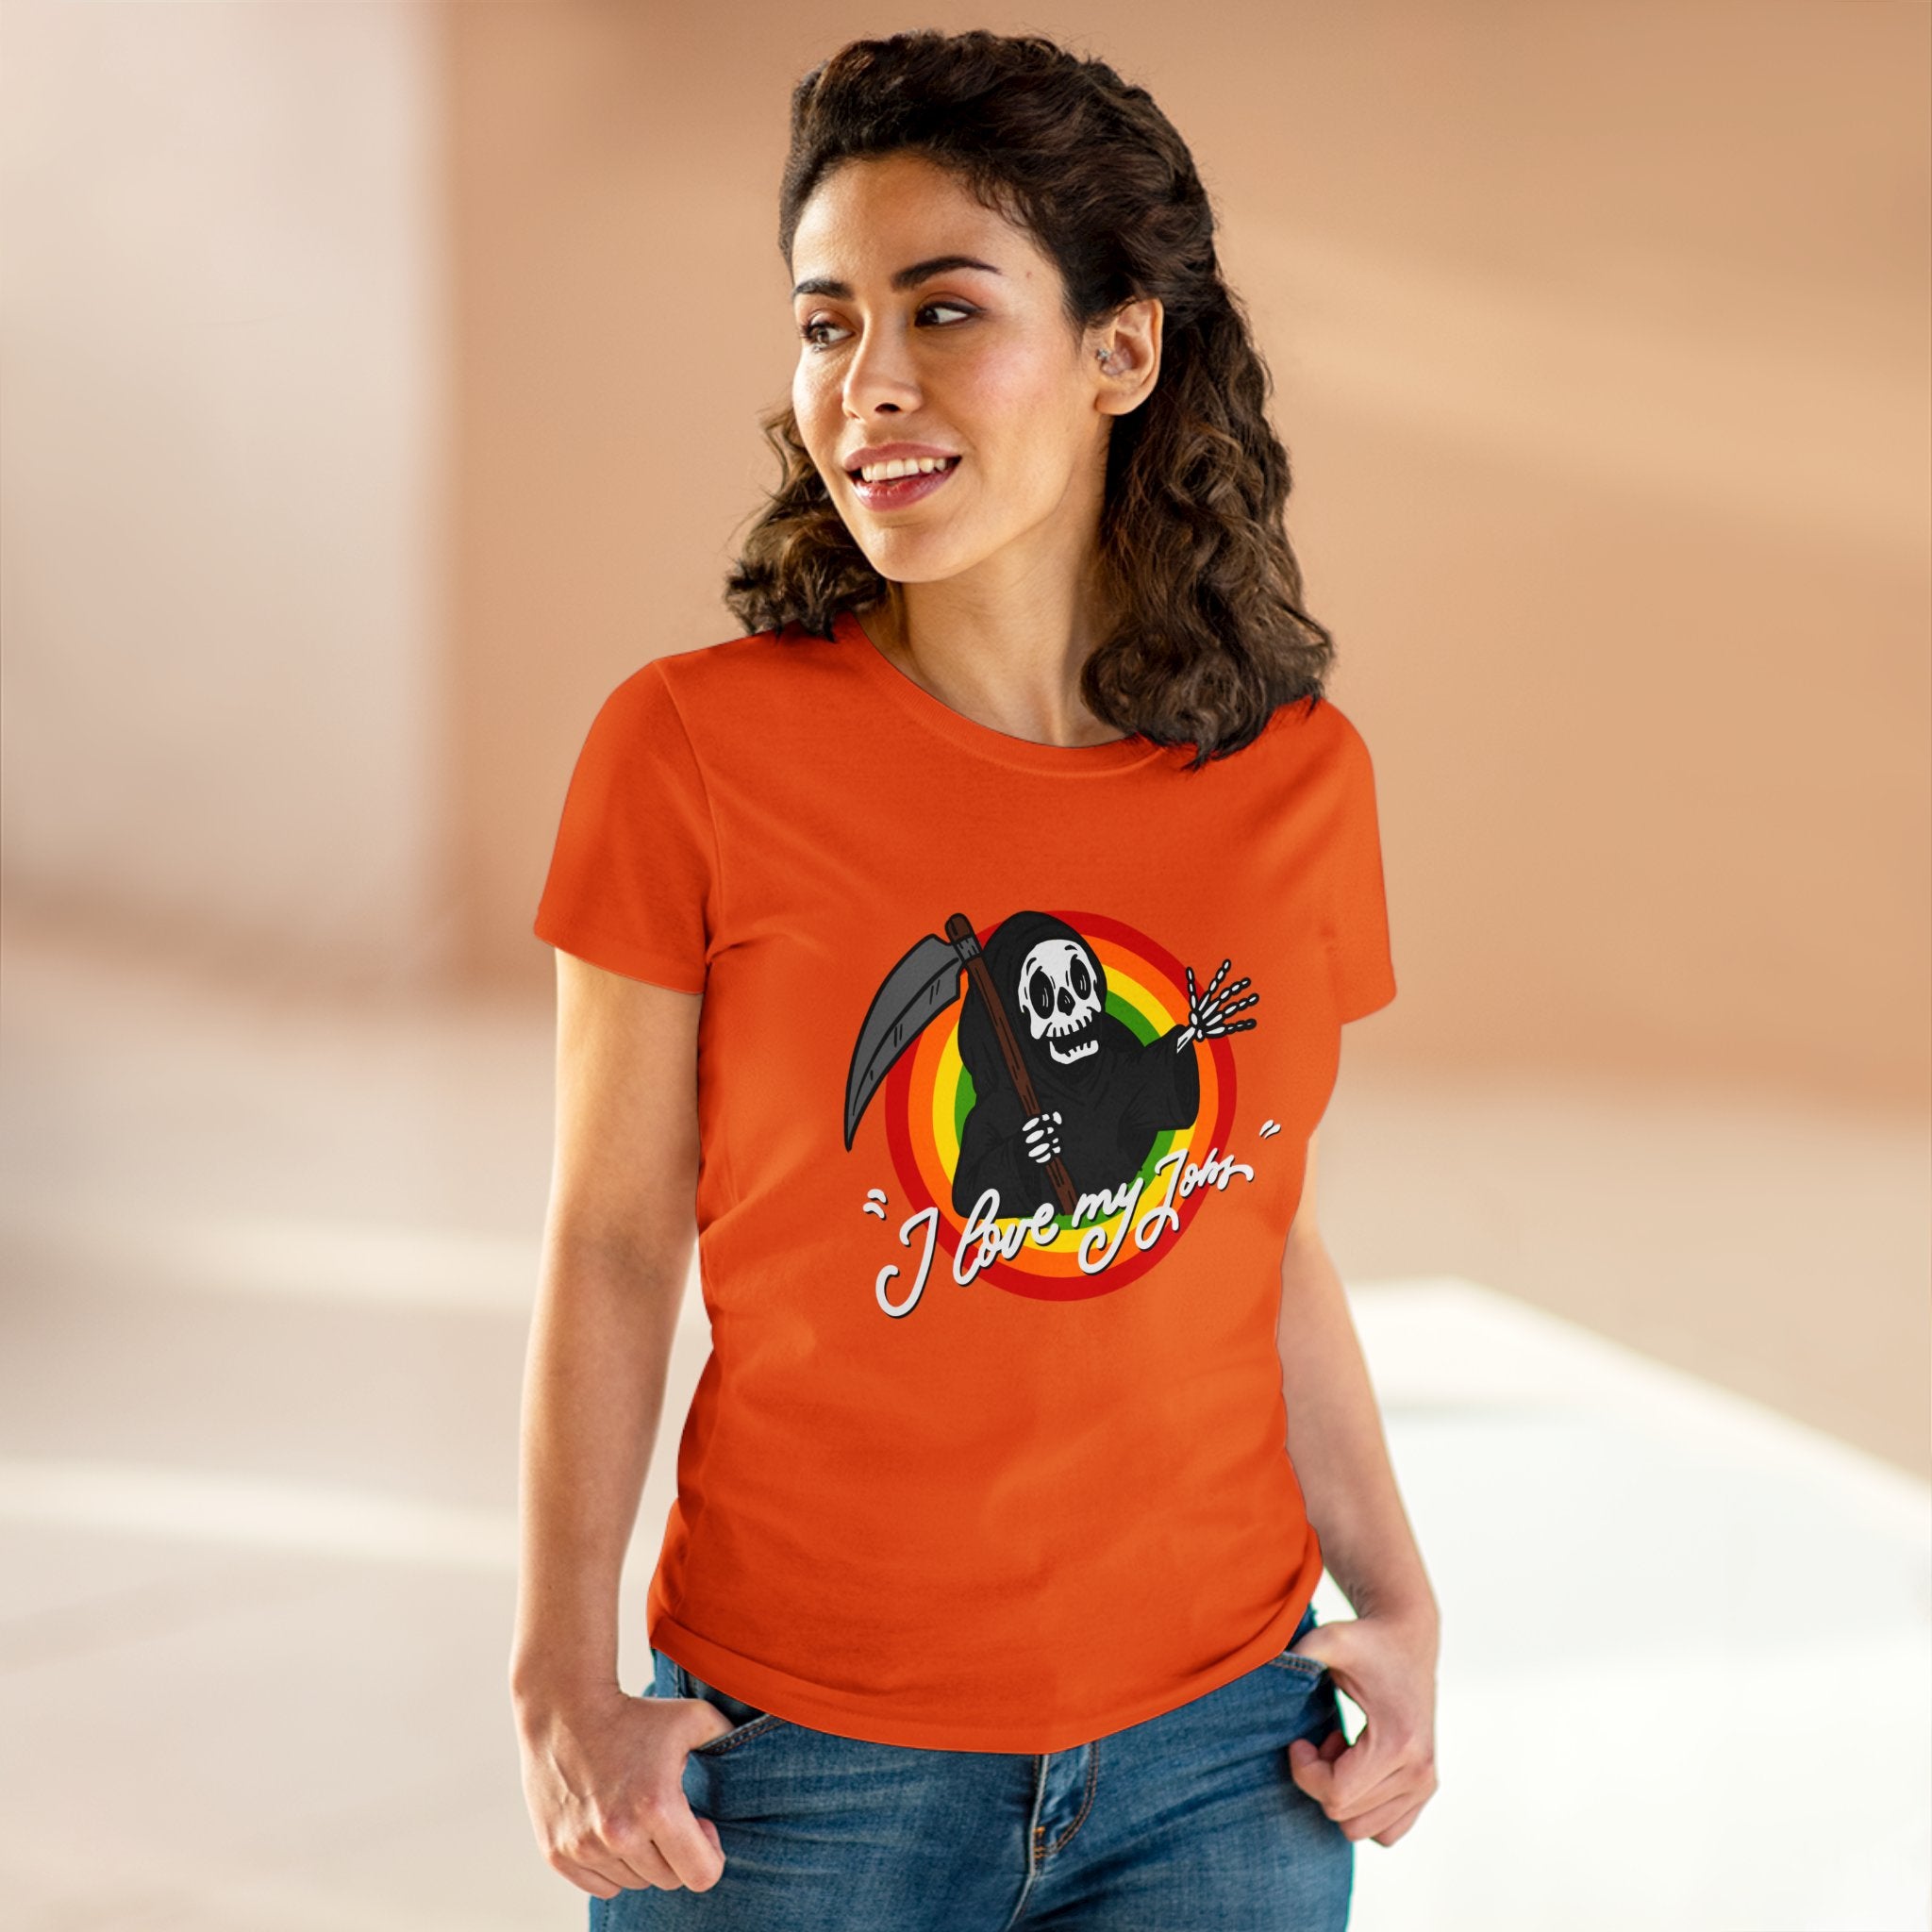 A woman with curly hair smiles and wears a soft, comfortable cotton Love My Jobs - Women's Tee, featuring a Grim Reaper graphic and the text "I Love My Job." She stands indoors against a blurred background.